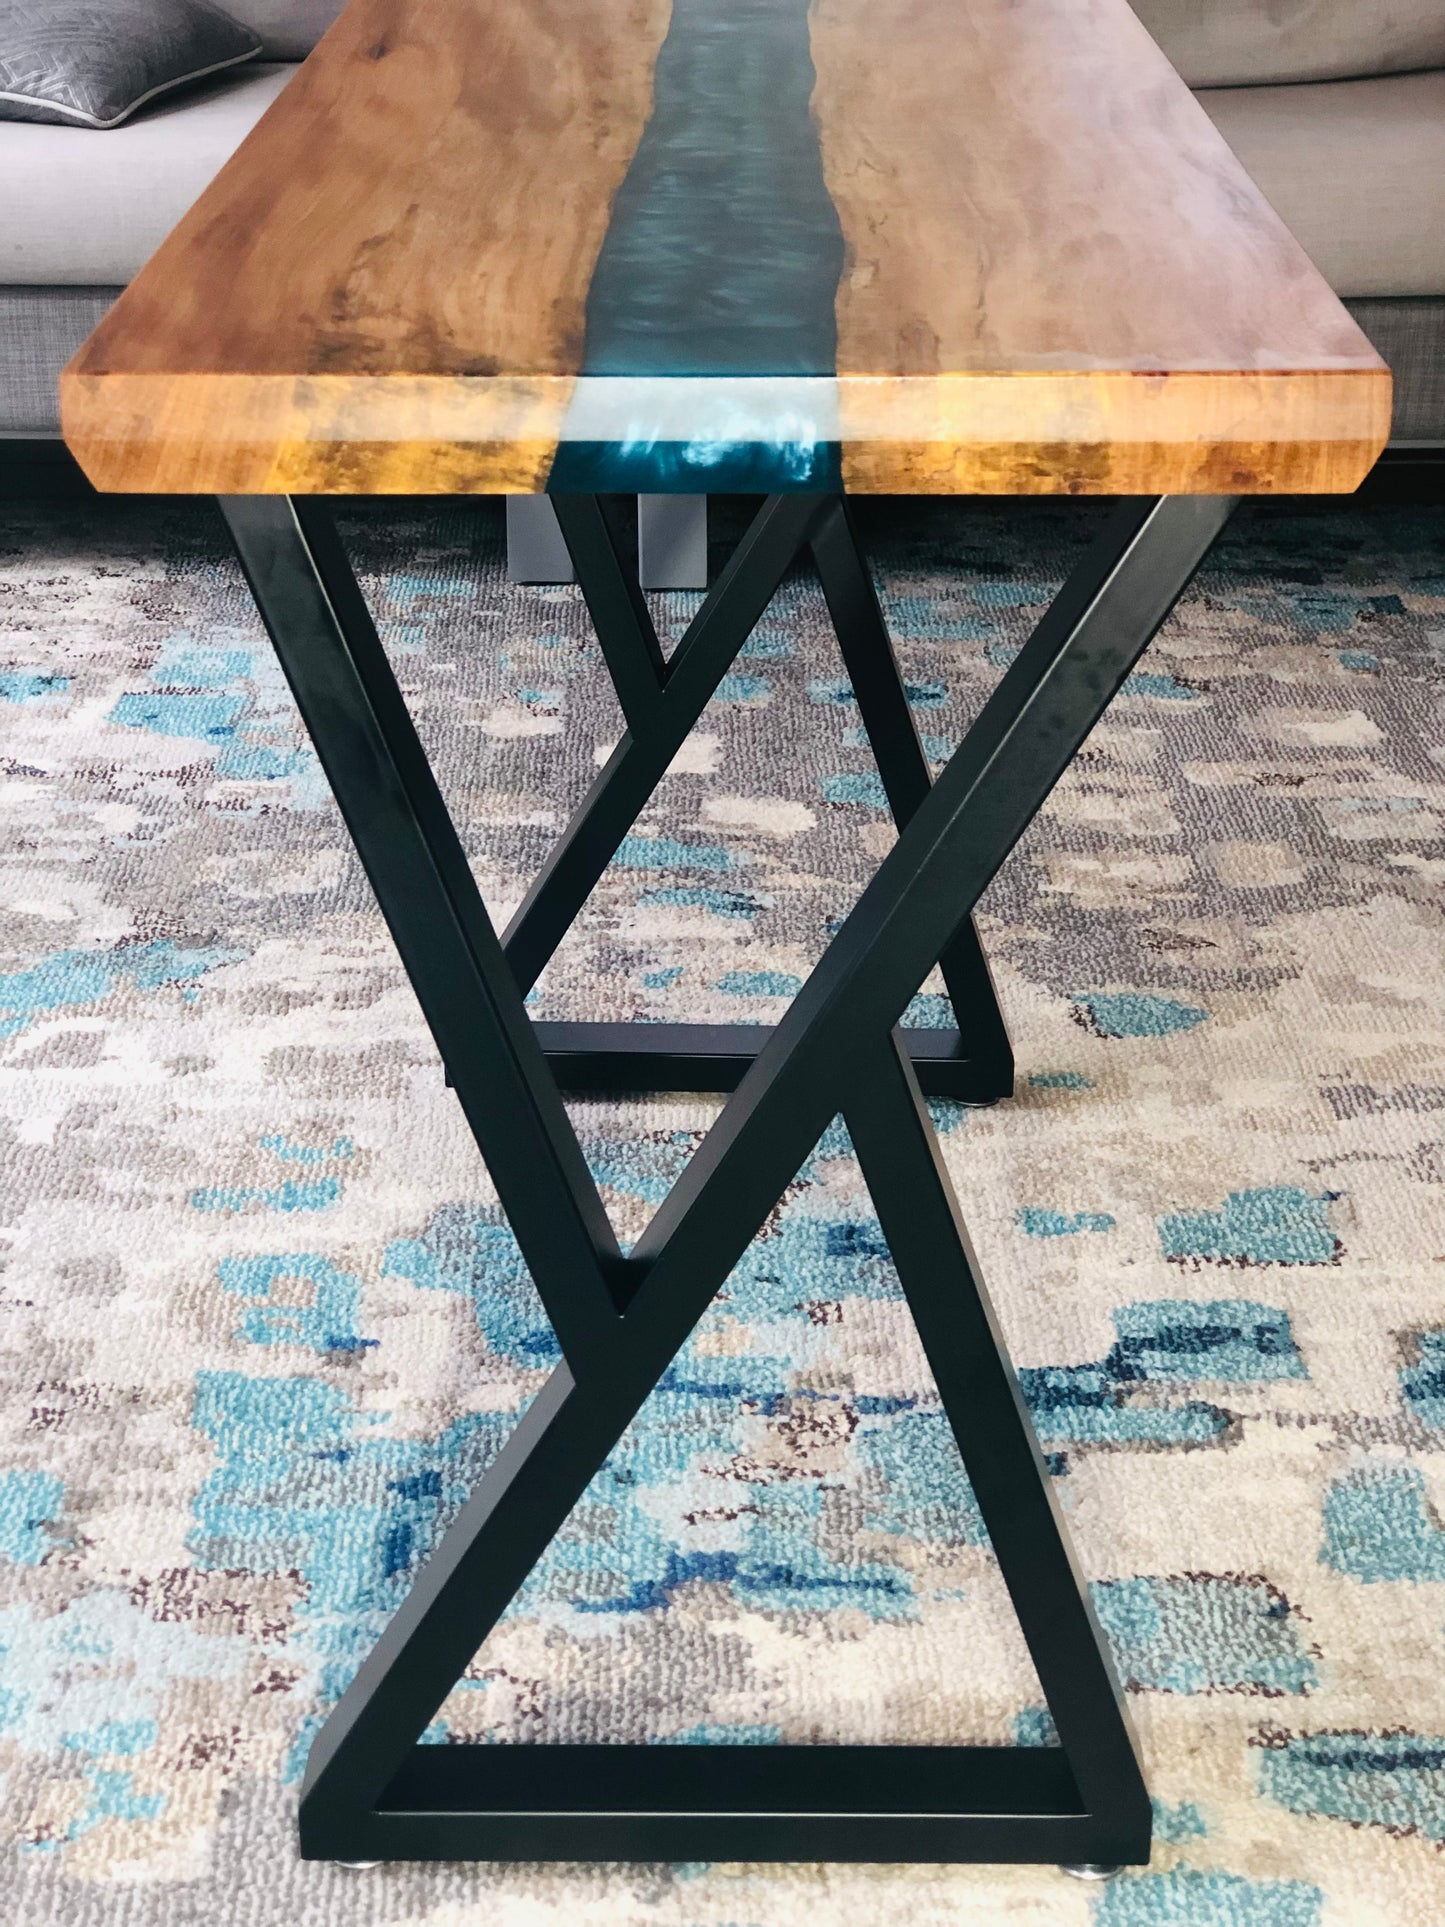 Sycamore and Emerald Green Epoxy Side Table